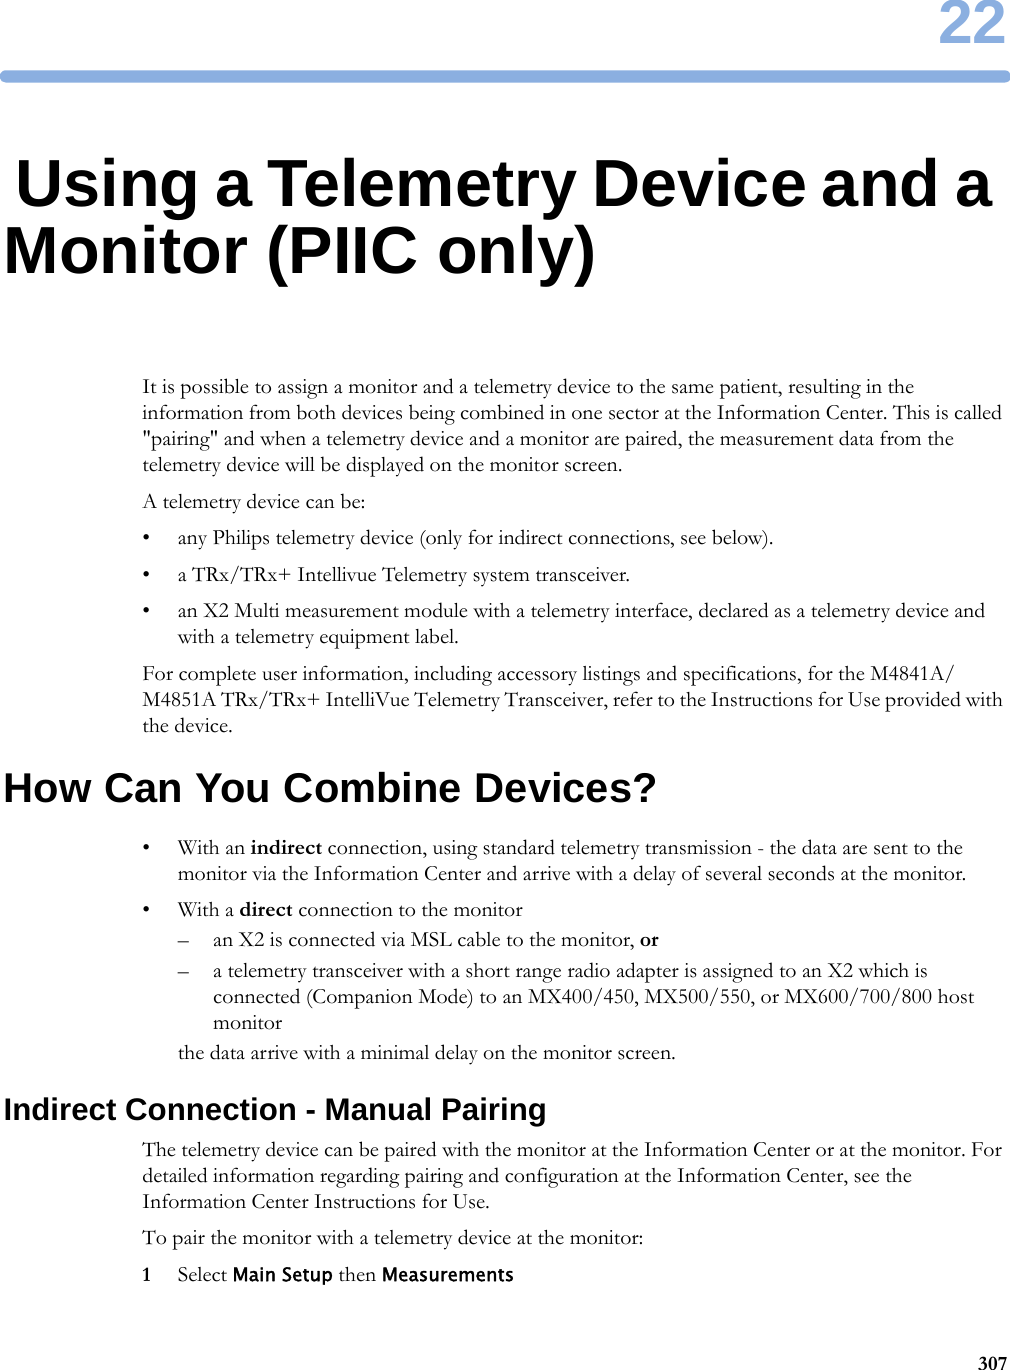 2230722Using a Telemetry Device and a Monitor (PIIC only)It is possible to assign a monitor and a telemetry device to the same patient, resulting in the information from both devices being combined in one sector at the Information Center. This is called &quot;pairing&quot; and when a telemetry device and a monitor are paired, the measurement data from the telemetry device will be displayed on the monitor screen.A telemetry device can be:• any Philips telemetry device (only for indirect connections, see below).• a TRx/TRx+ Intellivue Telemetry system transceiver.• an X2 Multi measurement module with a telemetry interface, declared as a telemetry device and with a telemetry equipment label.For complete user information, including accessory listings and specifications, for the M4841A/M4851A TRx/TRx+ IntelliVue Telemetry Transceiver, refer to the Instructions for Use provided with the device.How Can You Combine Devices?•With an indirect connection, using standard telemetry transmission - the data are sent to the monitor via the Information Center and arrive with a delay of several seconds at the monitor.•With a direct connection to the monitor– an X2 is connected via MSL cable to the monitor, or– a telemetry transceiver with a short range radio adapter is assigned to an X2 which is connected (Companion Mode) to an MX400/450, MX500/550, or MX600/700/800 host monitorthe data arrive with a minimal delay on the monitor screen.Indirect Connection - Manual PairingThe telemetry device can be paired with the monitor at the Information Center or at the monitor. For detailed information regarding pairing and configuration at the Information Center, see the Information Center Instructions for Use.To pair the monitor with a telemetry device at the monitor:1Select Main Setup then Measurements